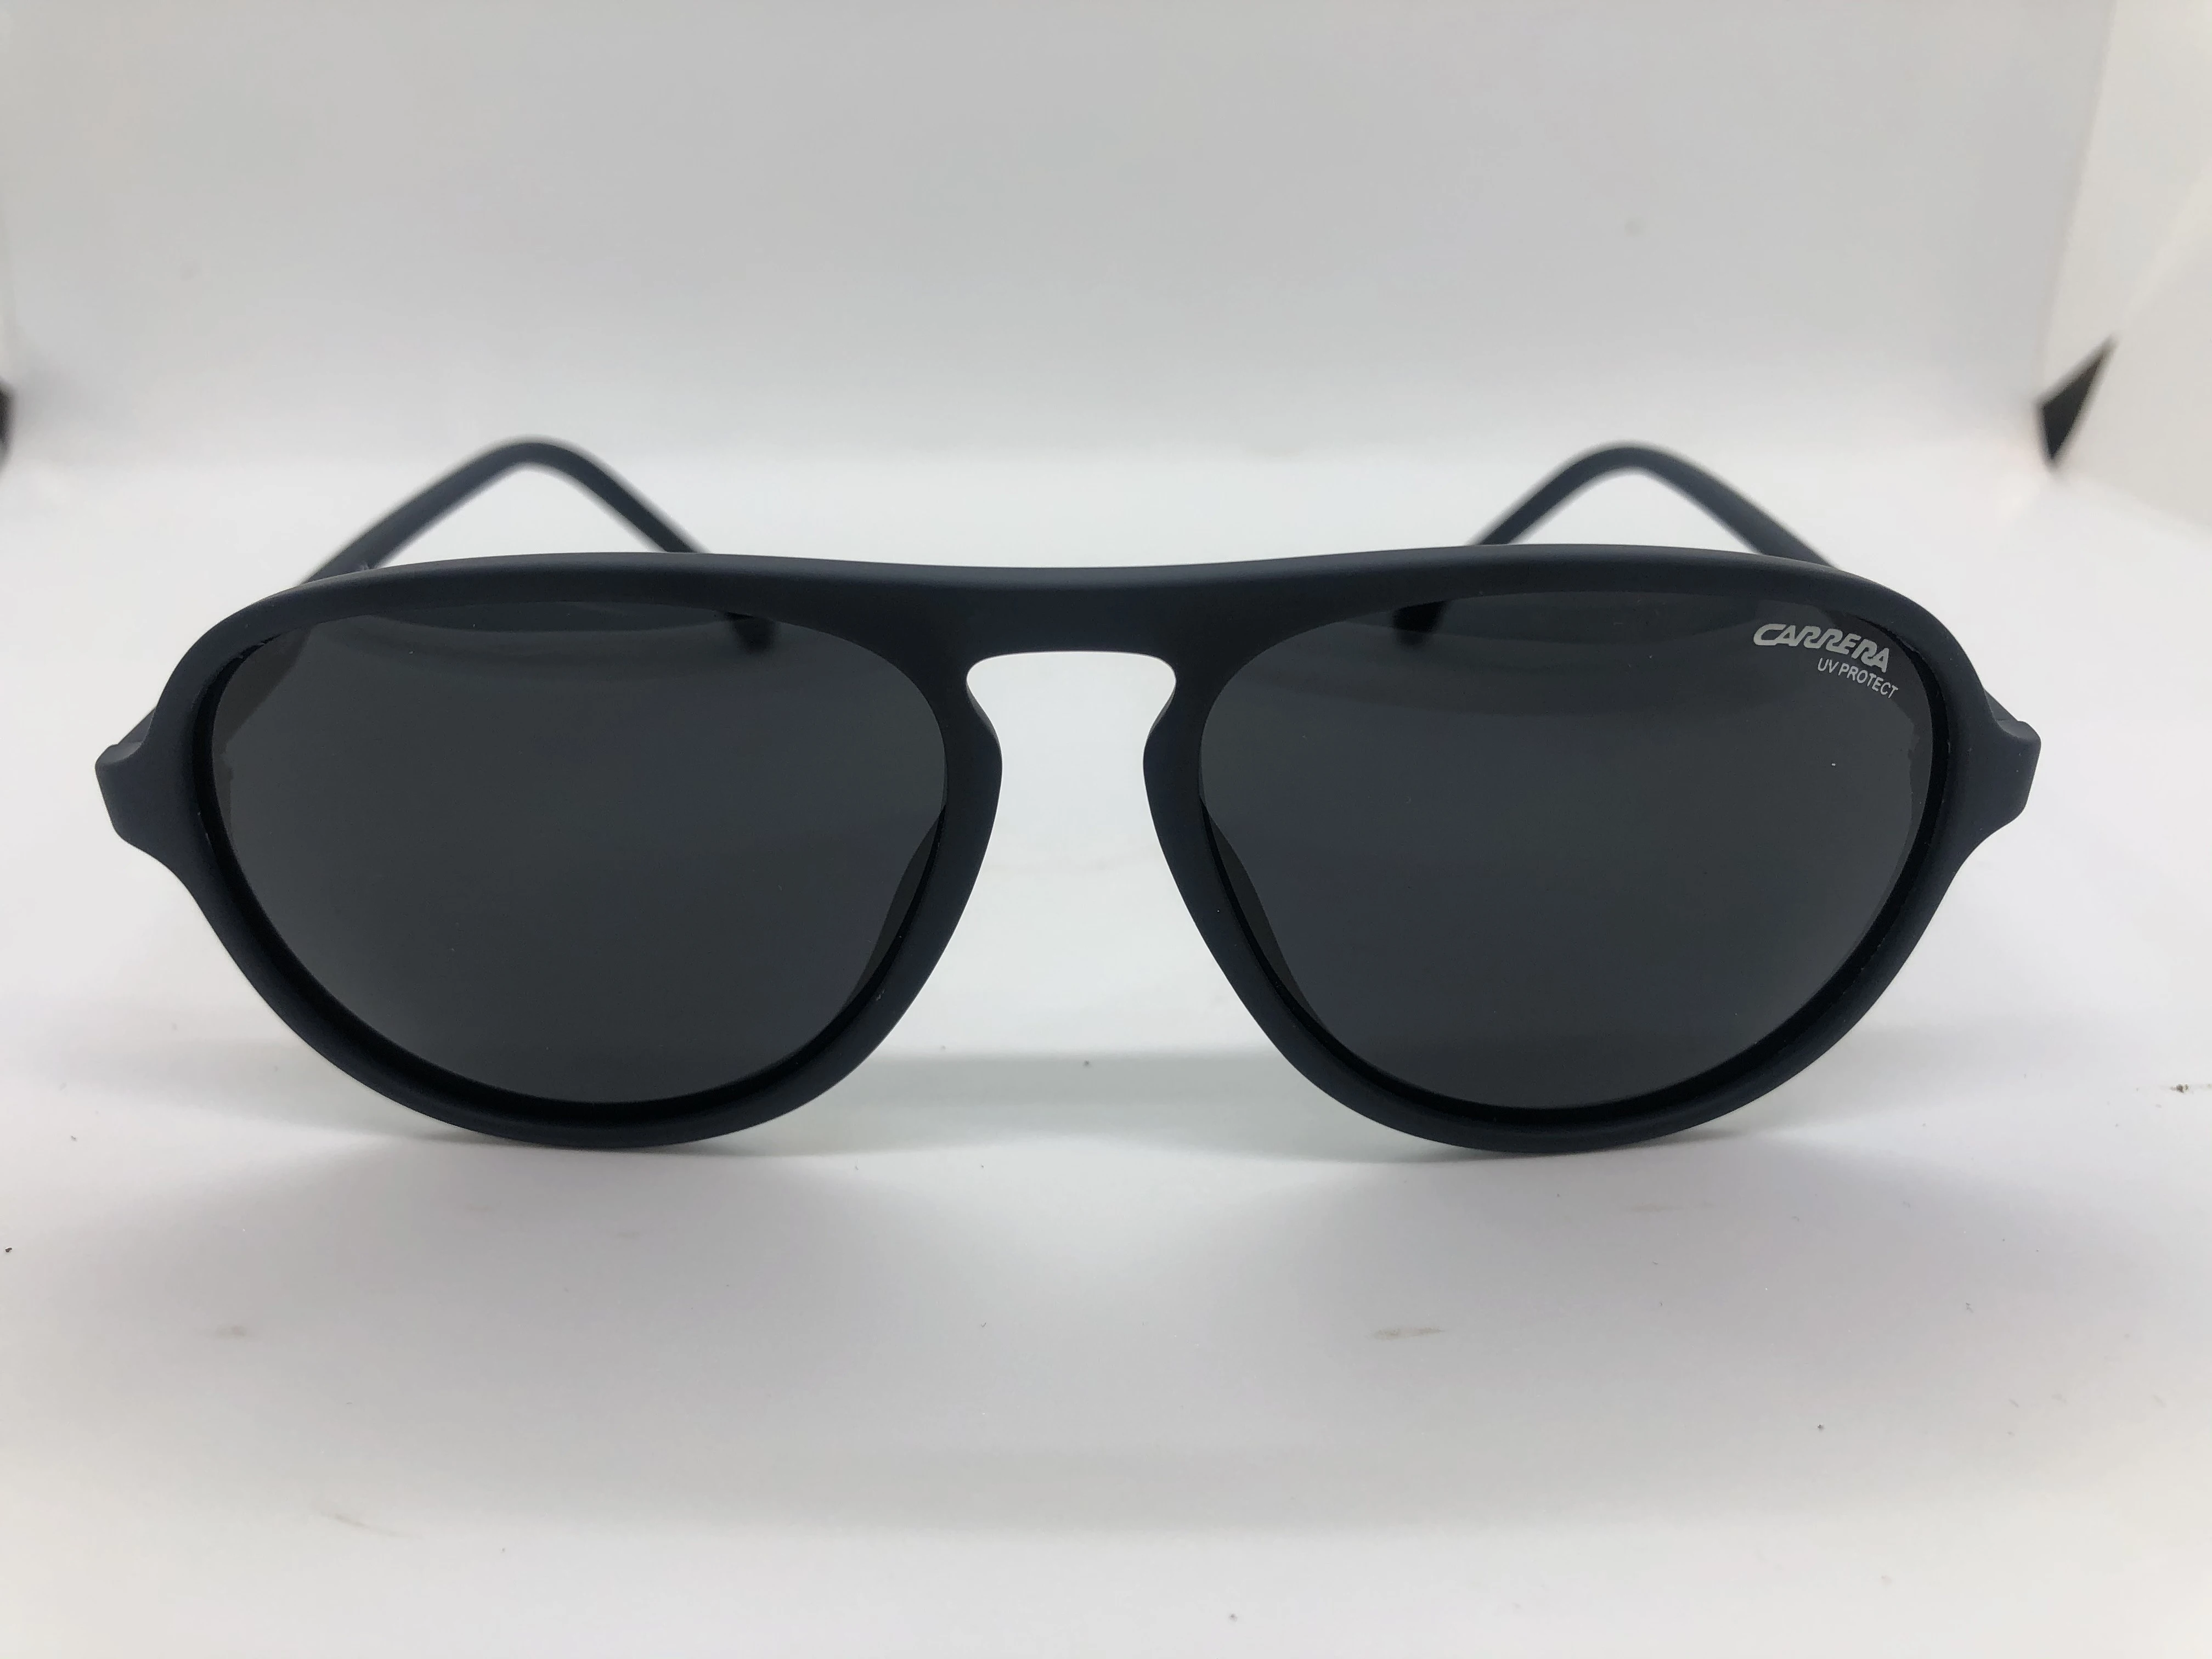 Sunglasses - black from Carrera - with petroleum polycarbonate frame - and hazel lenses - for men